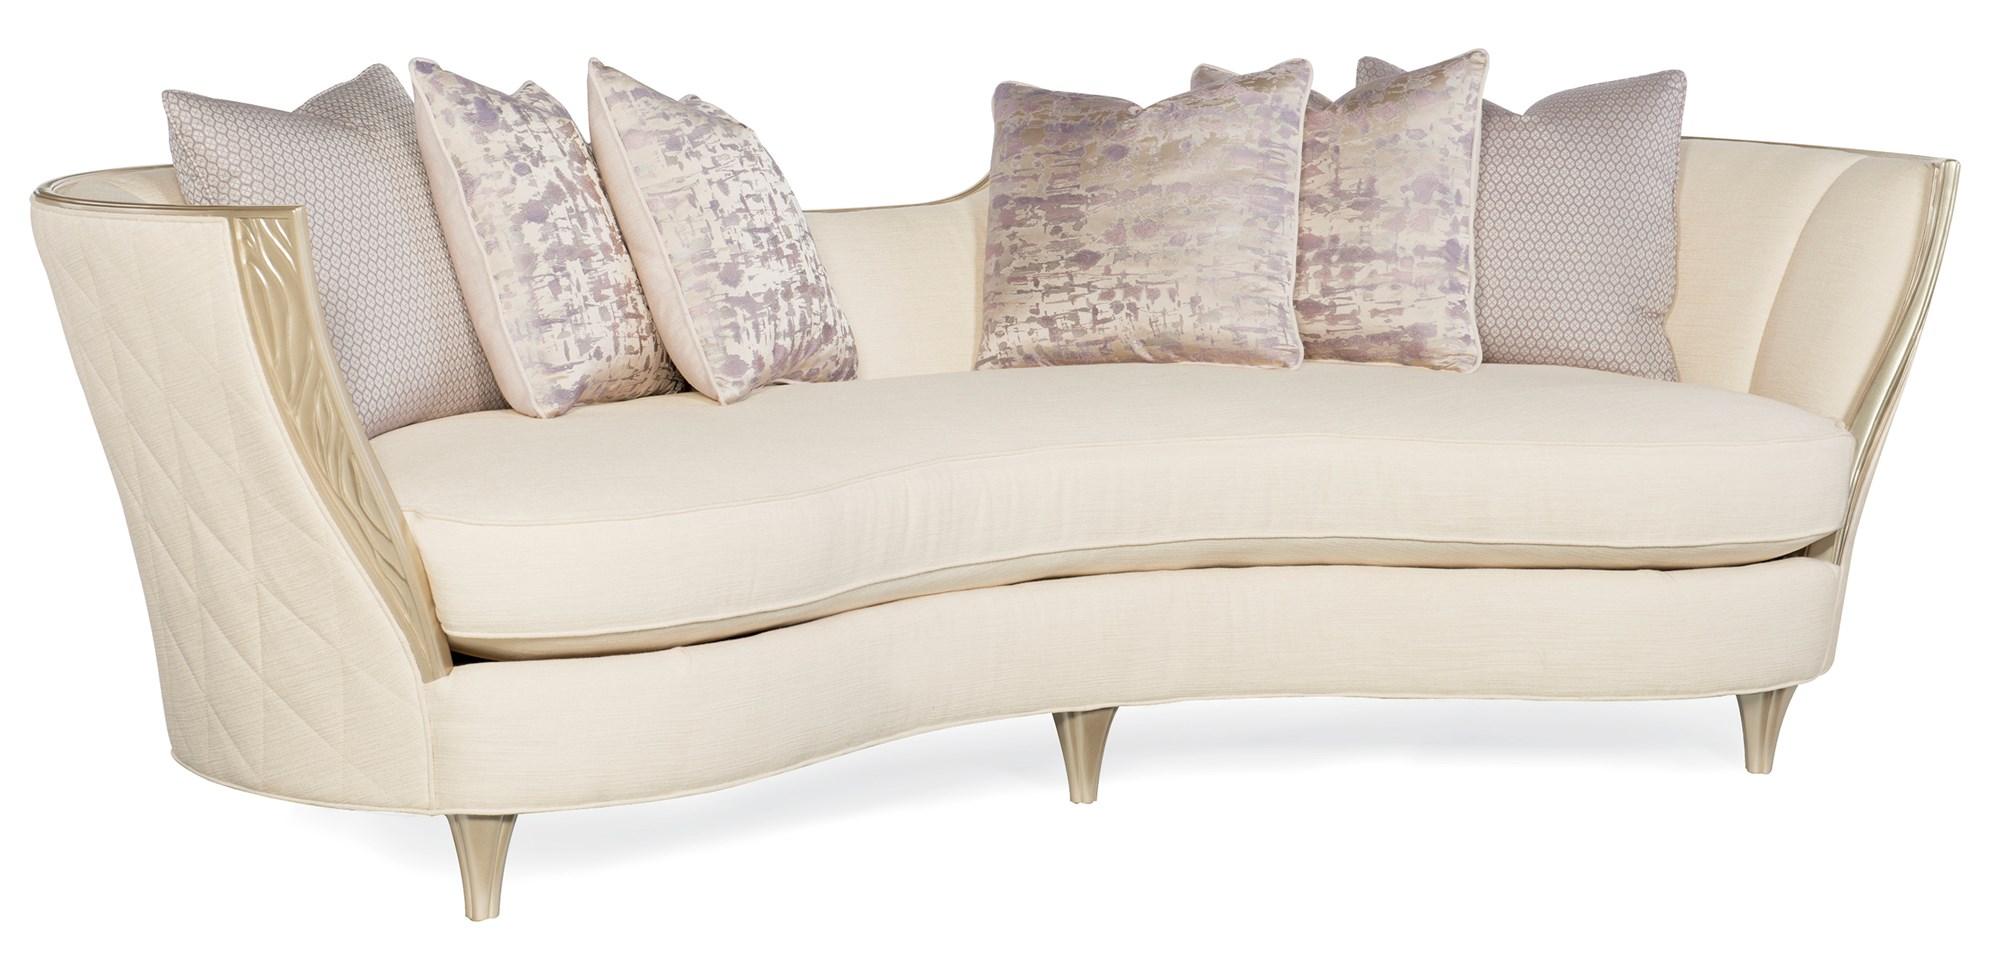 Traditional Sofa ADELA SOFA C010-016-012-A in Off-White, Taupe Fabric